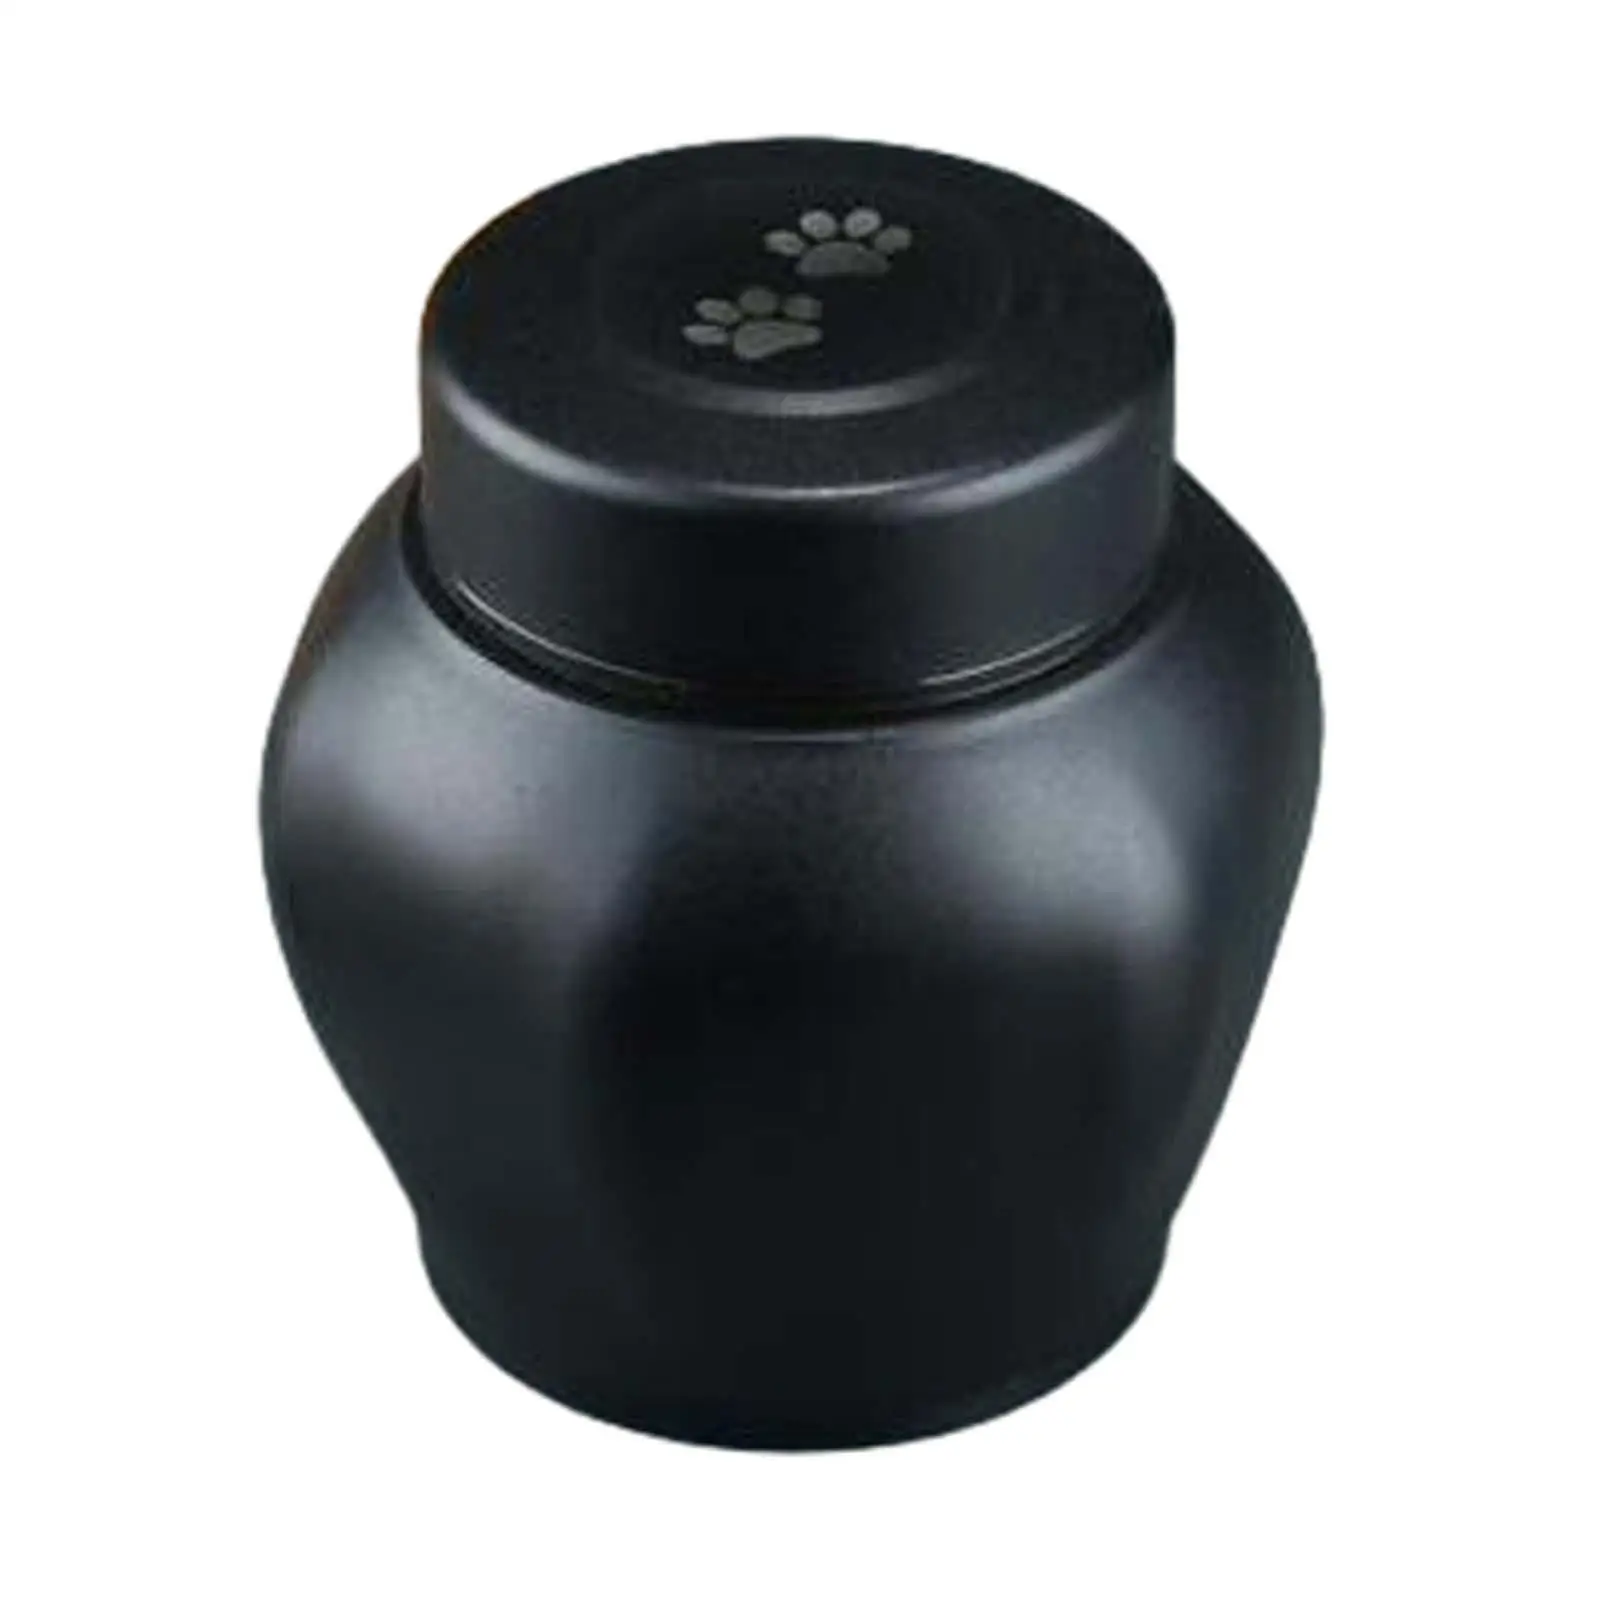 Cremation Urn Durable Keepsake Urn Small Dog Urn for Ash Cat Ash Holder for Dogs Cats Small Animals Bunny Kitten Rabbit